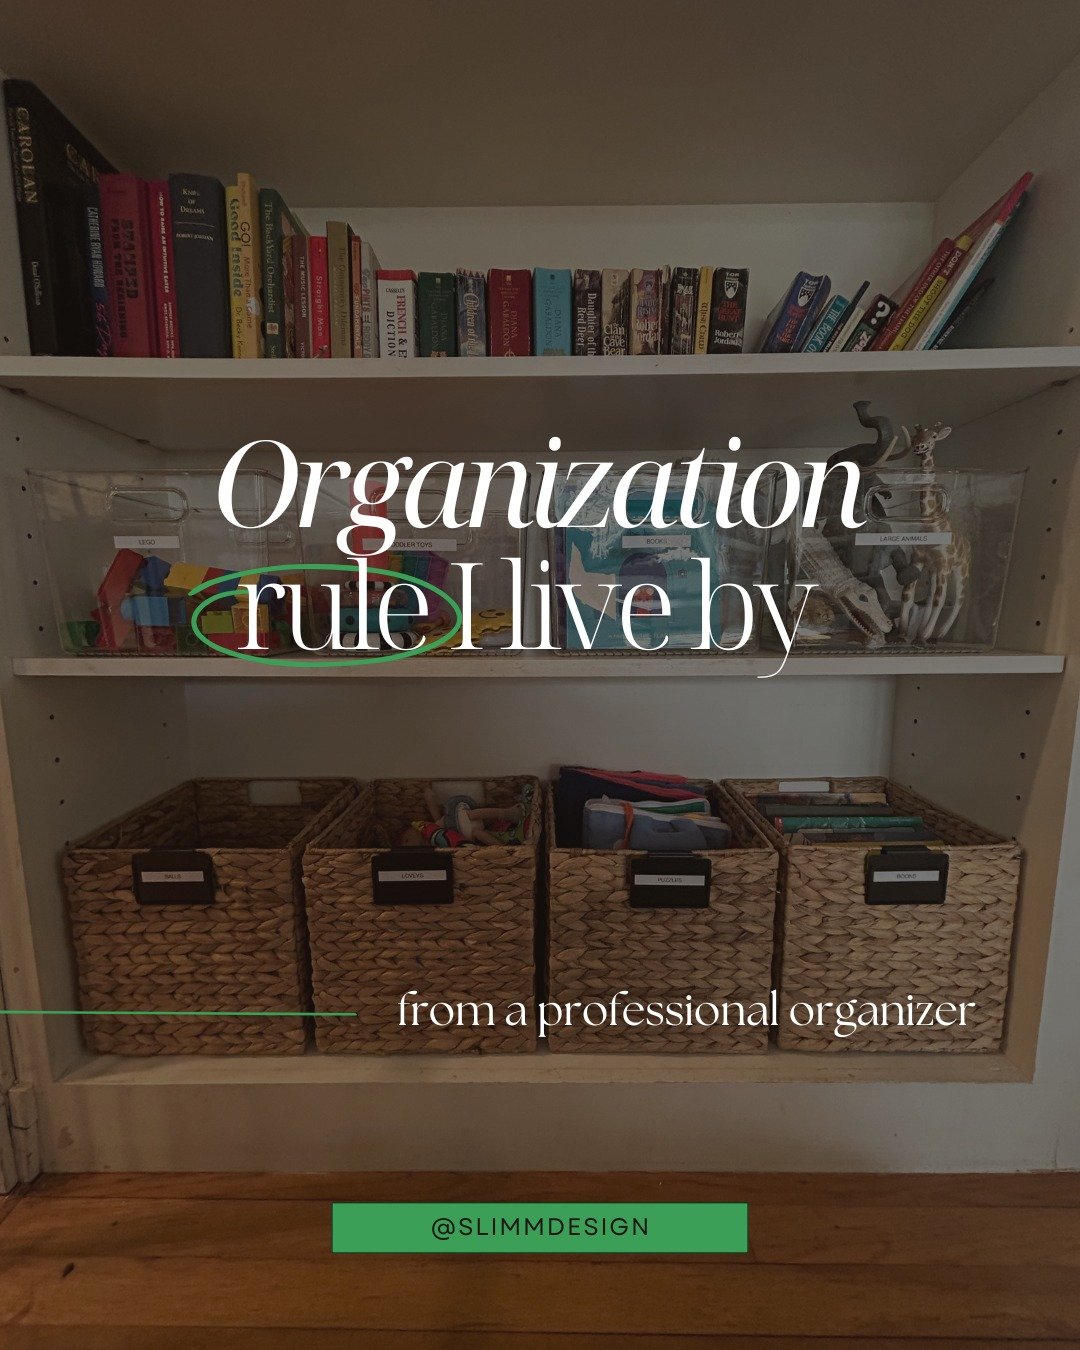 I hate to break it to you, but if you've never been organized, then organization won't come naturally for you.

The problem is that you're not necessarily disorganized, you just have habits that favor disorganization. So you need to adopt habits that